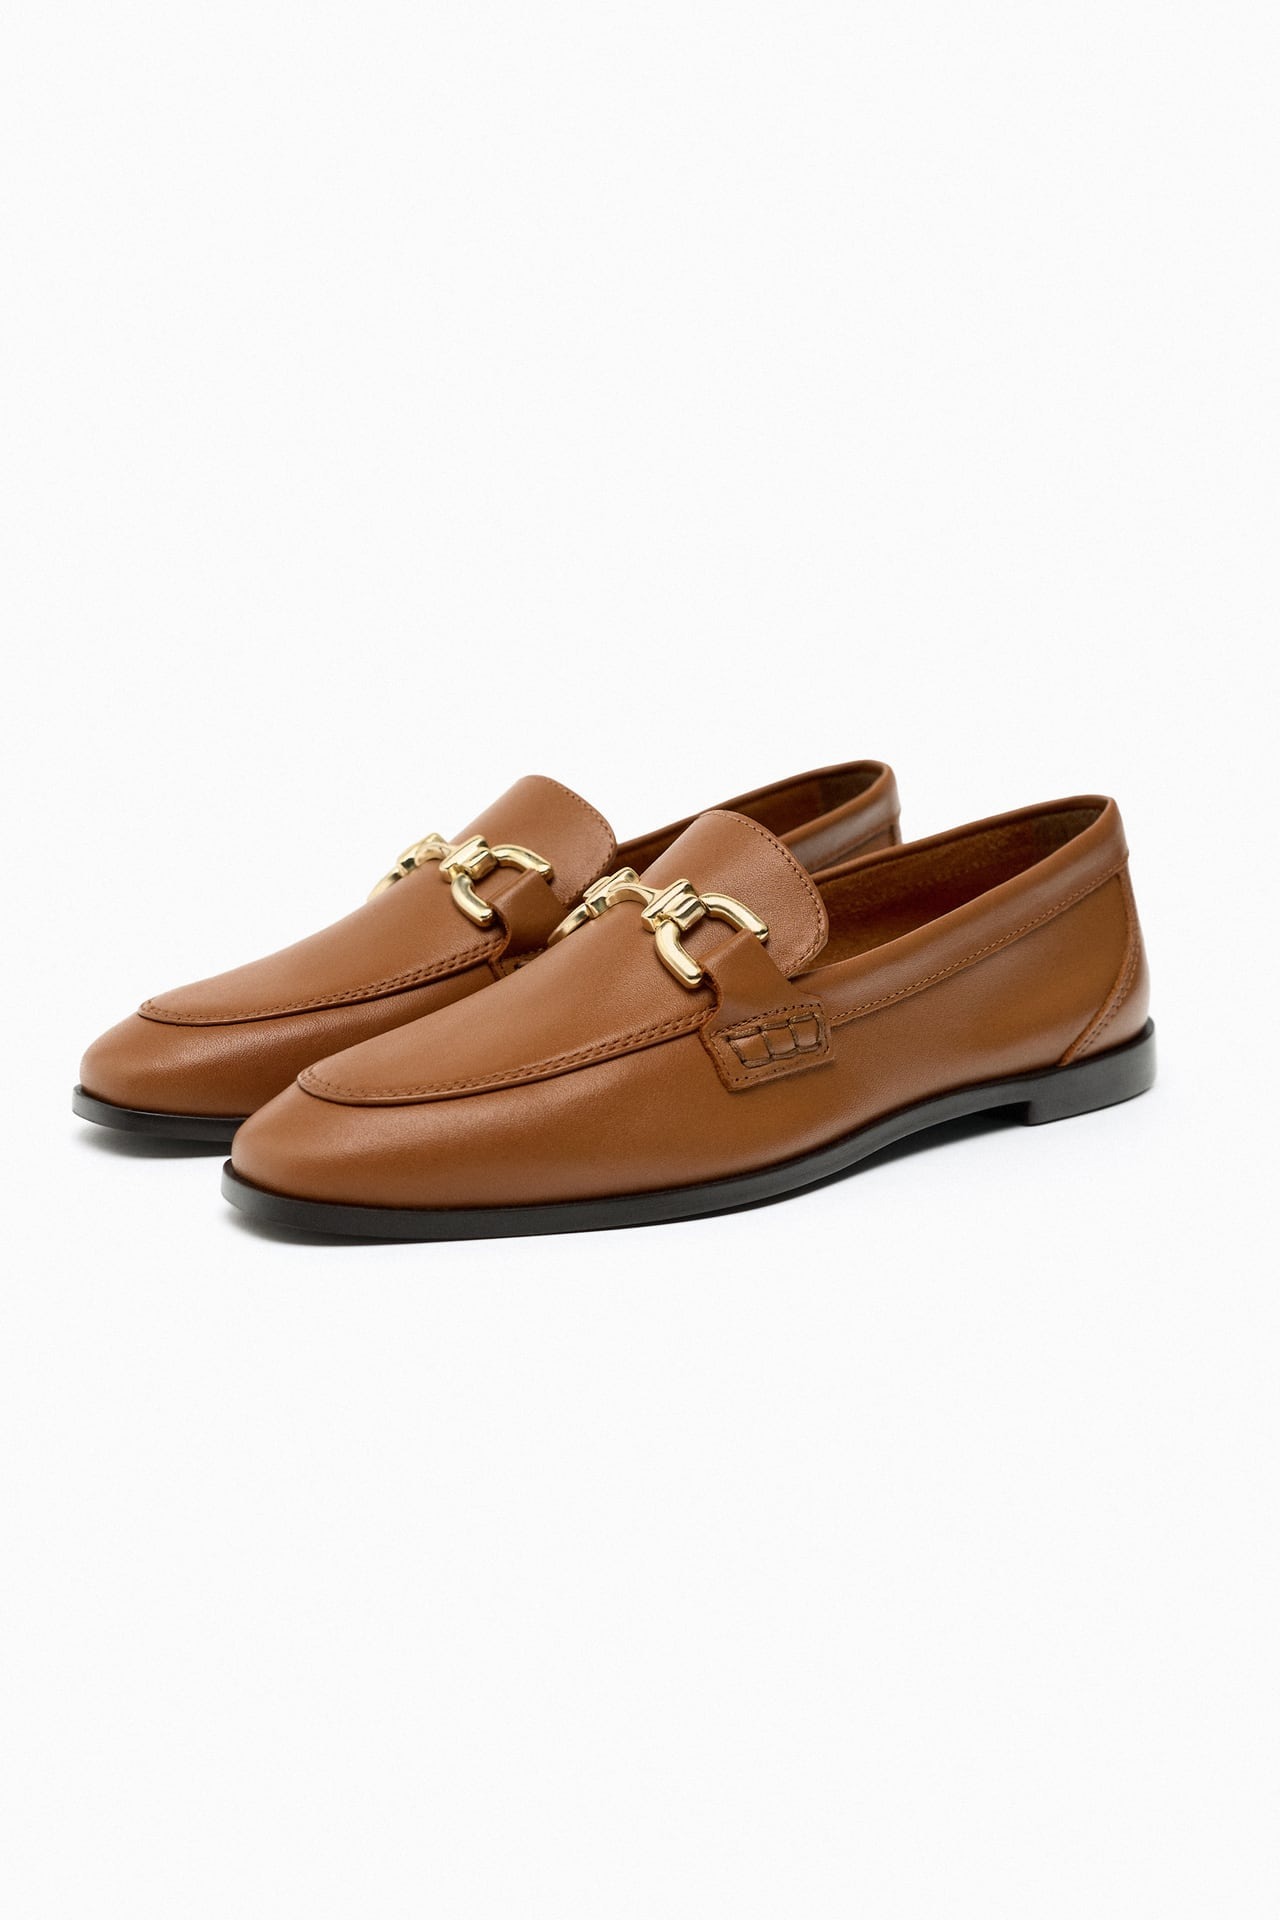 8 Best Loafers for Women of 2023, Reviewed by Editors | Who What Wear